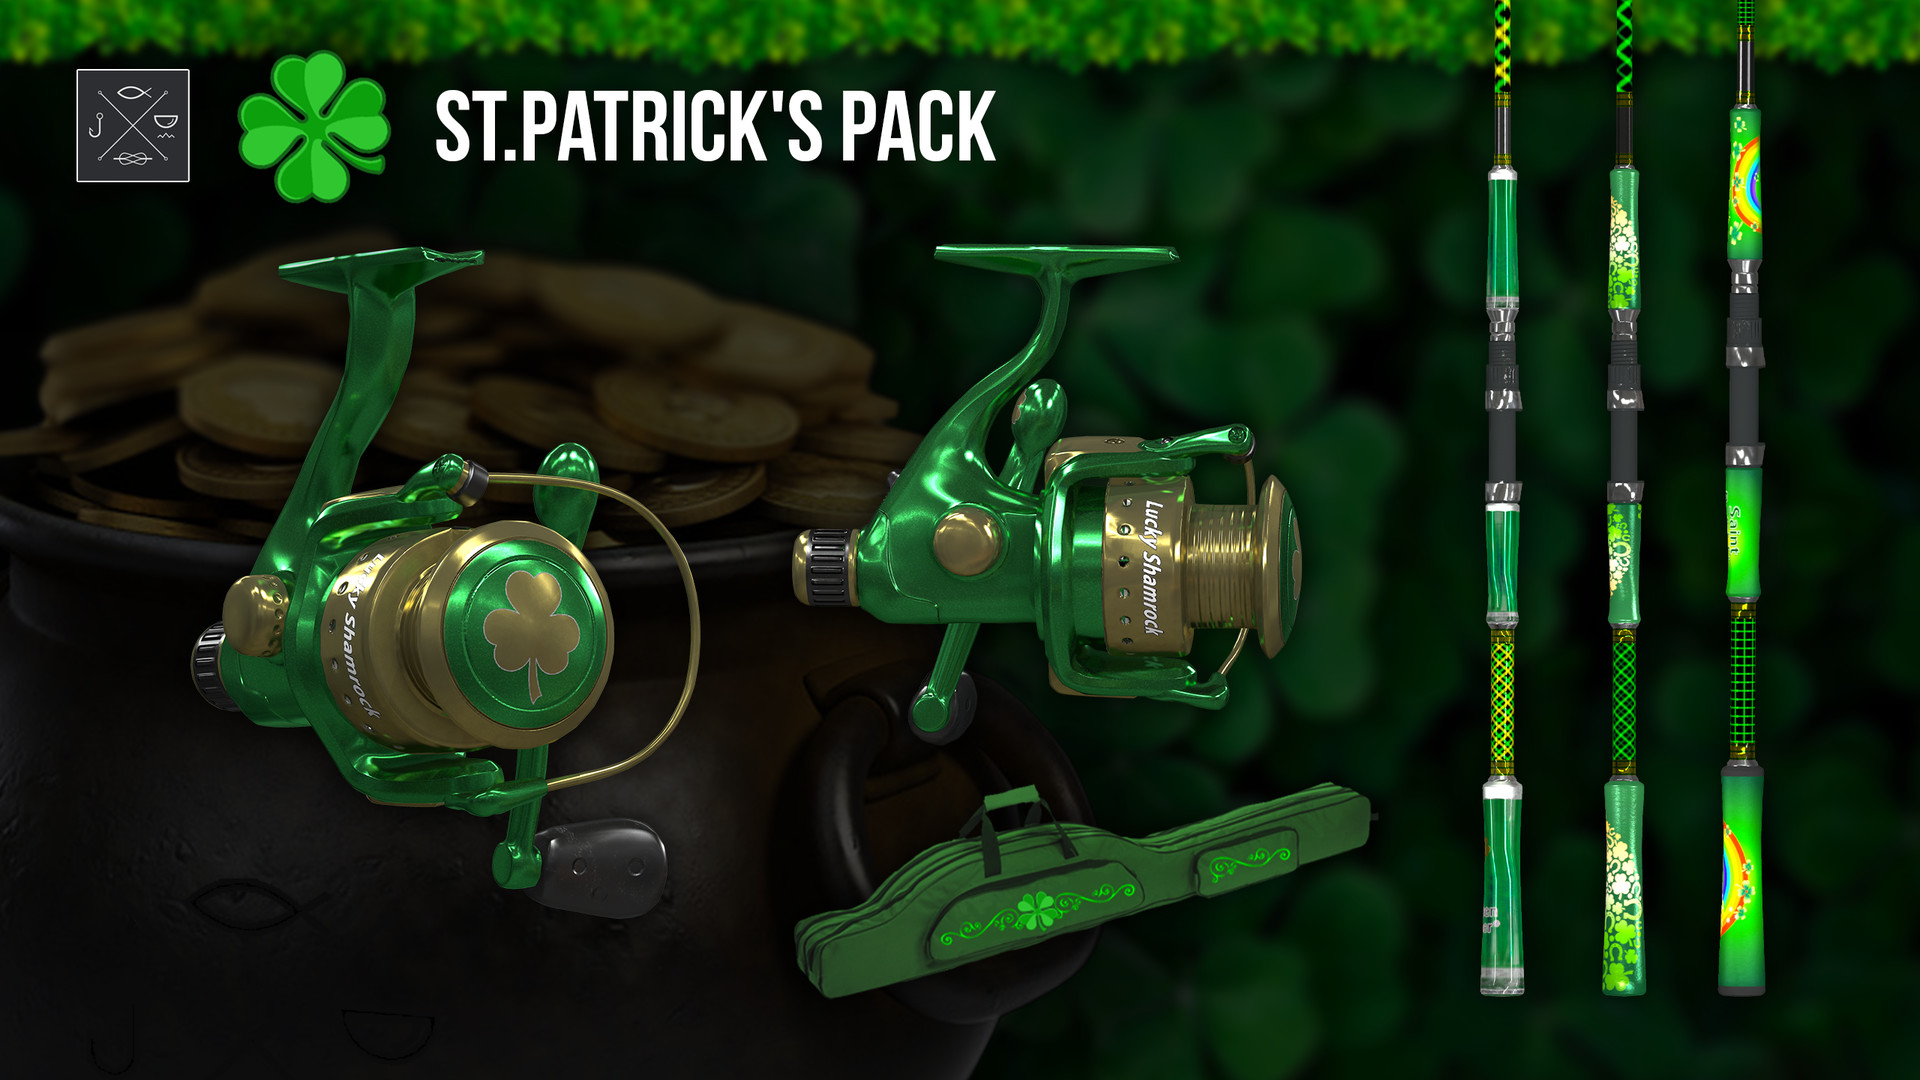 Fishing Planet: St.Patrick's Pack Featured Screenshot #1